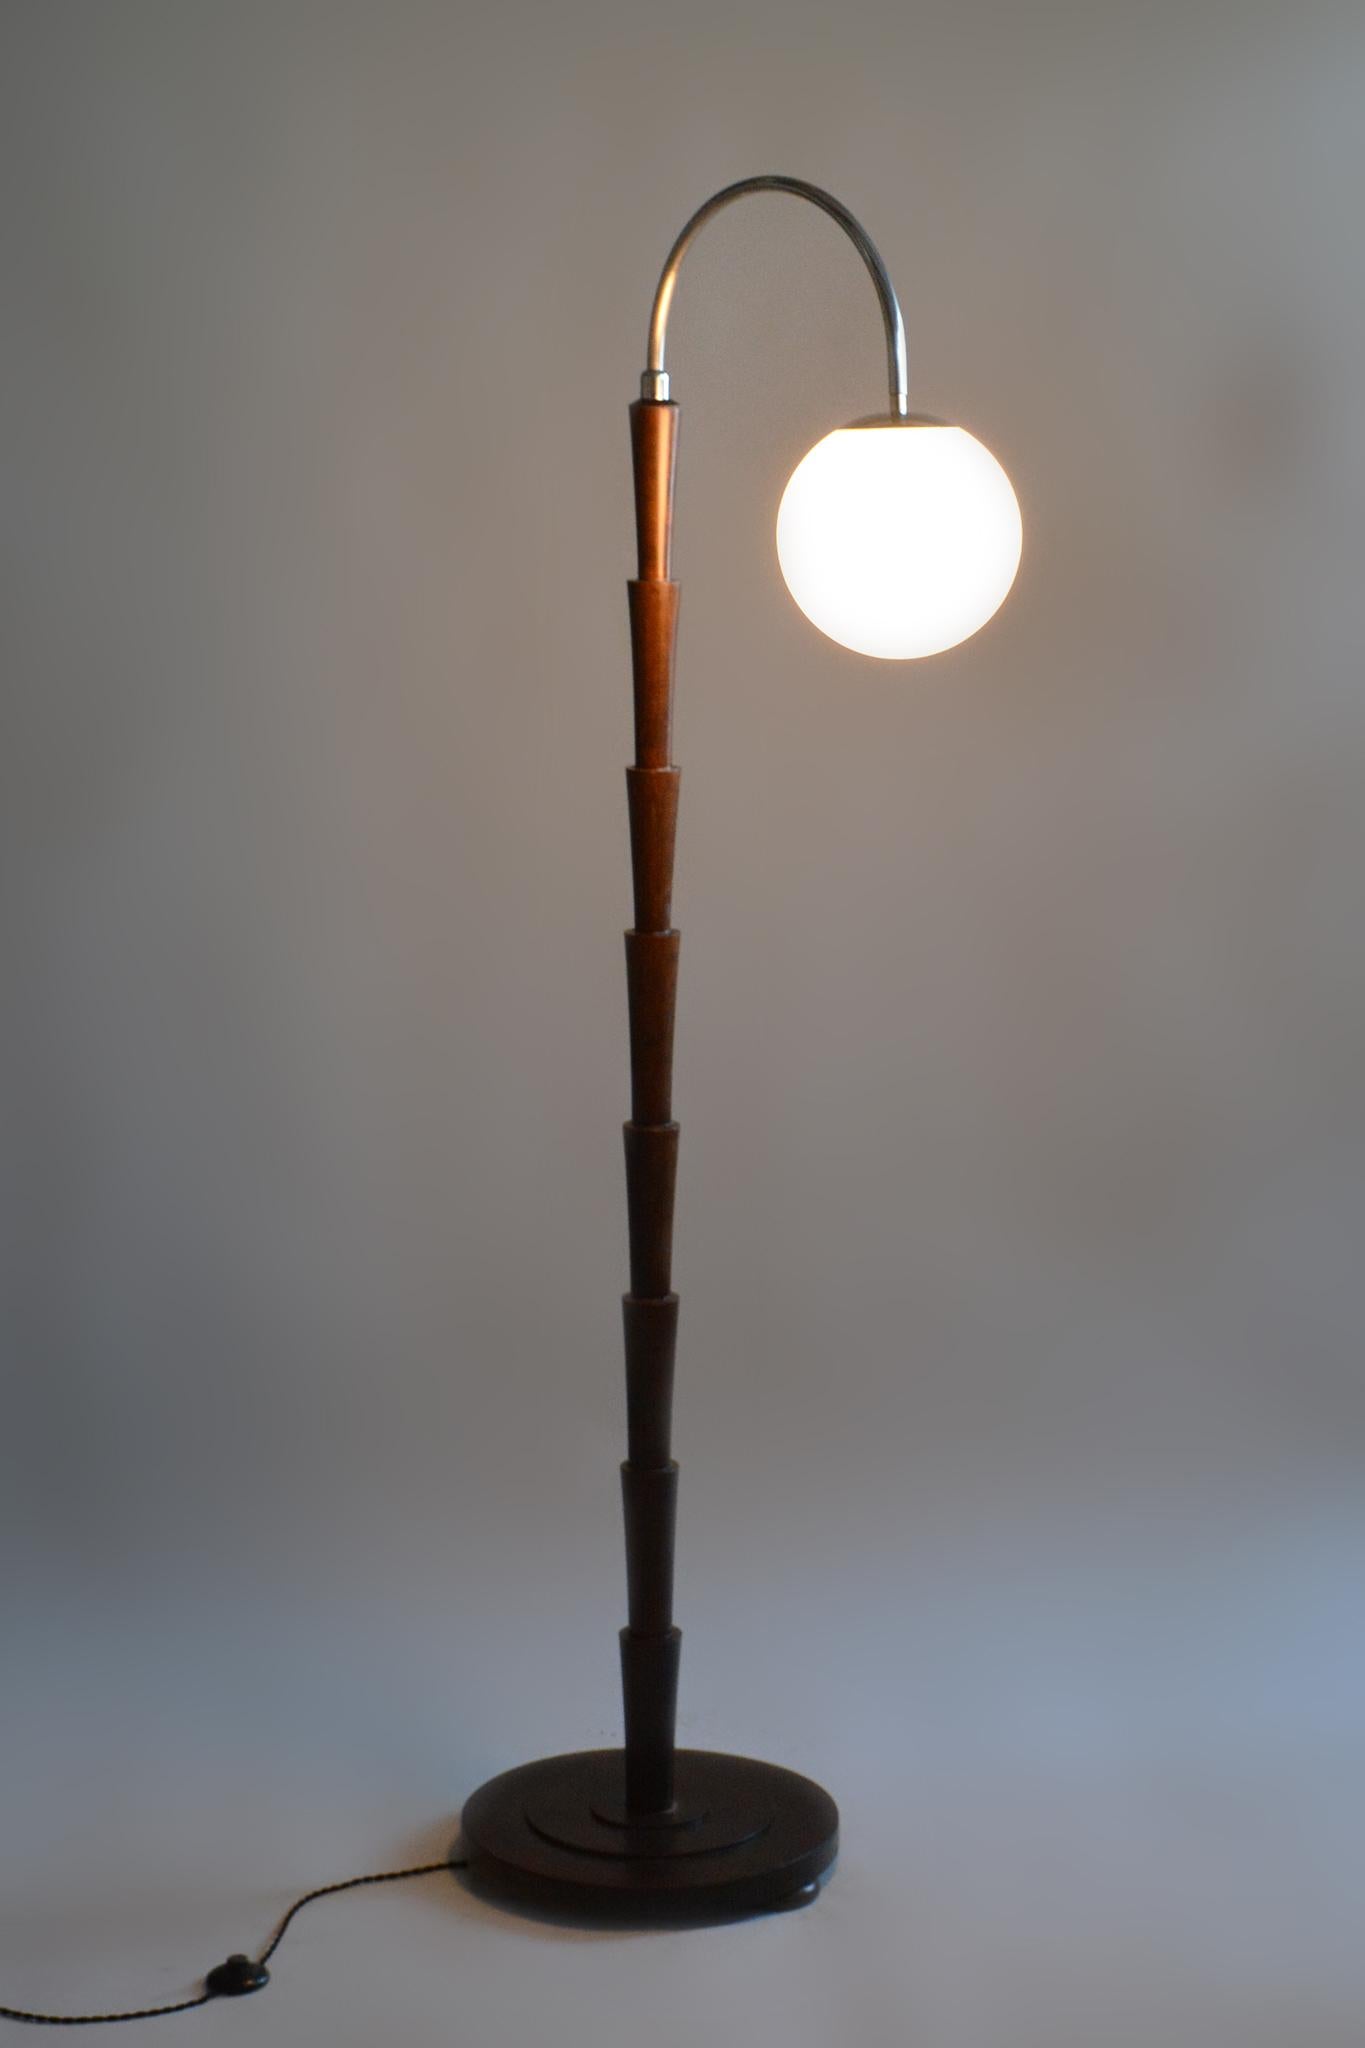 Other Restored Czech Cubism Floor Lamp, Beech, Chrome-plated Steel, Czechia, 1920s For Sale